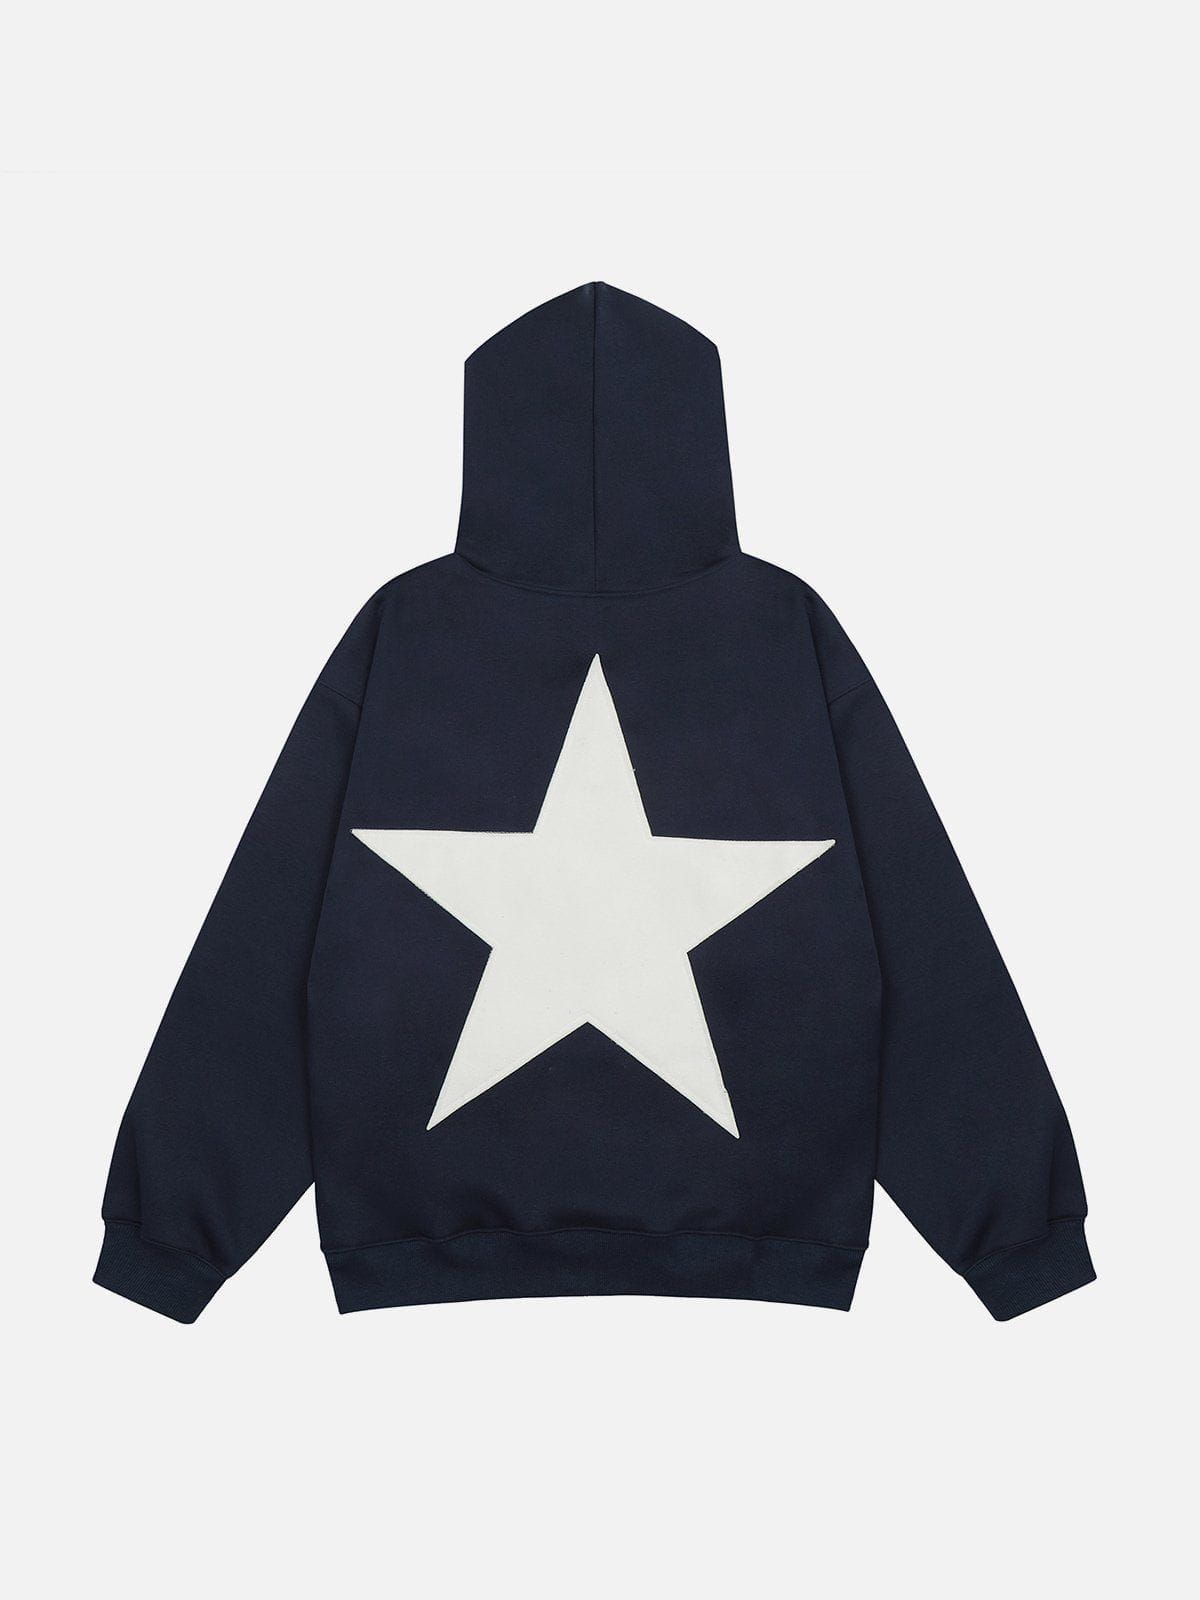 Aelfric Eden Star Print Color Contrast Hoodie [Recommended by @sundaykalo]